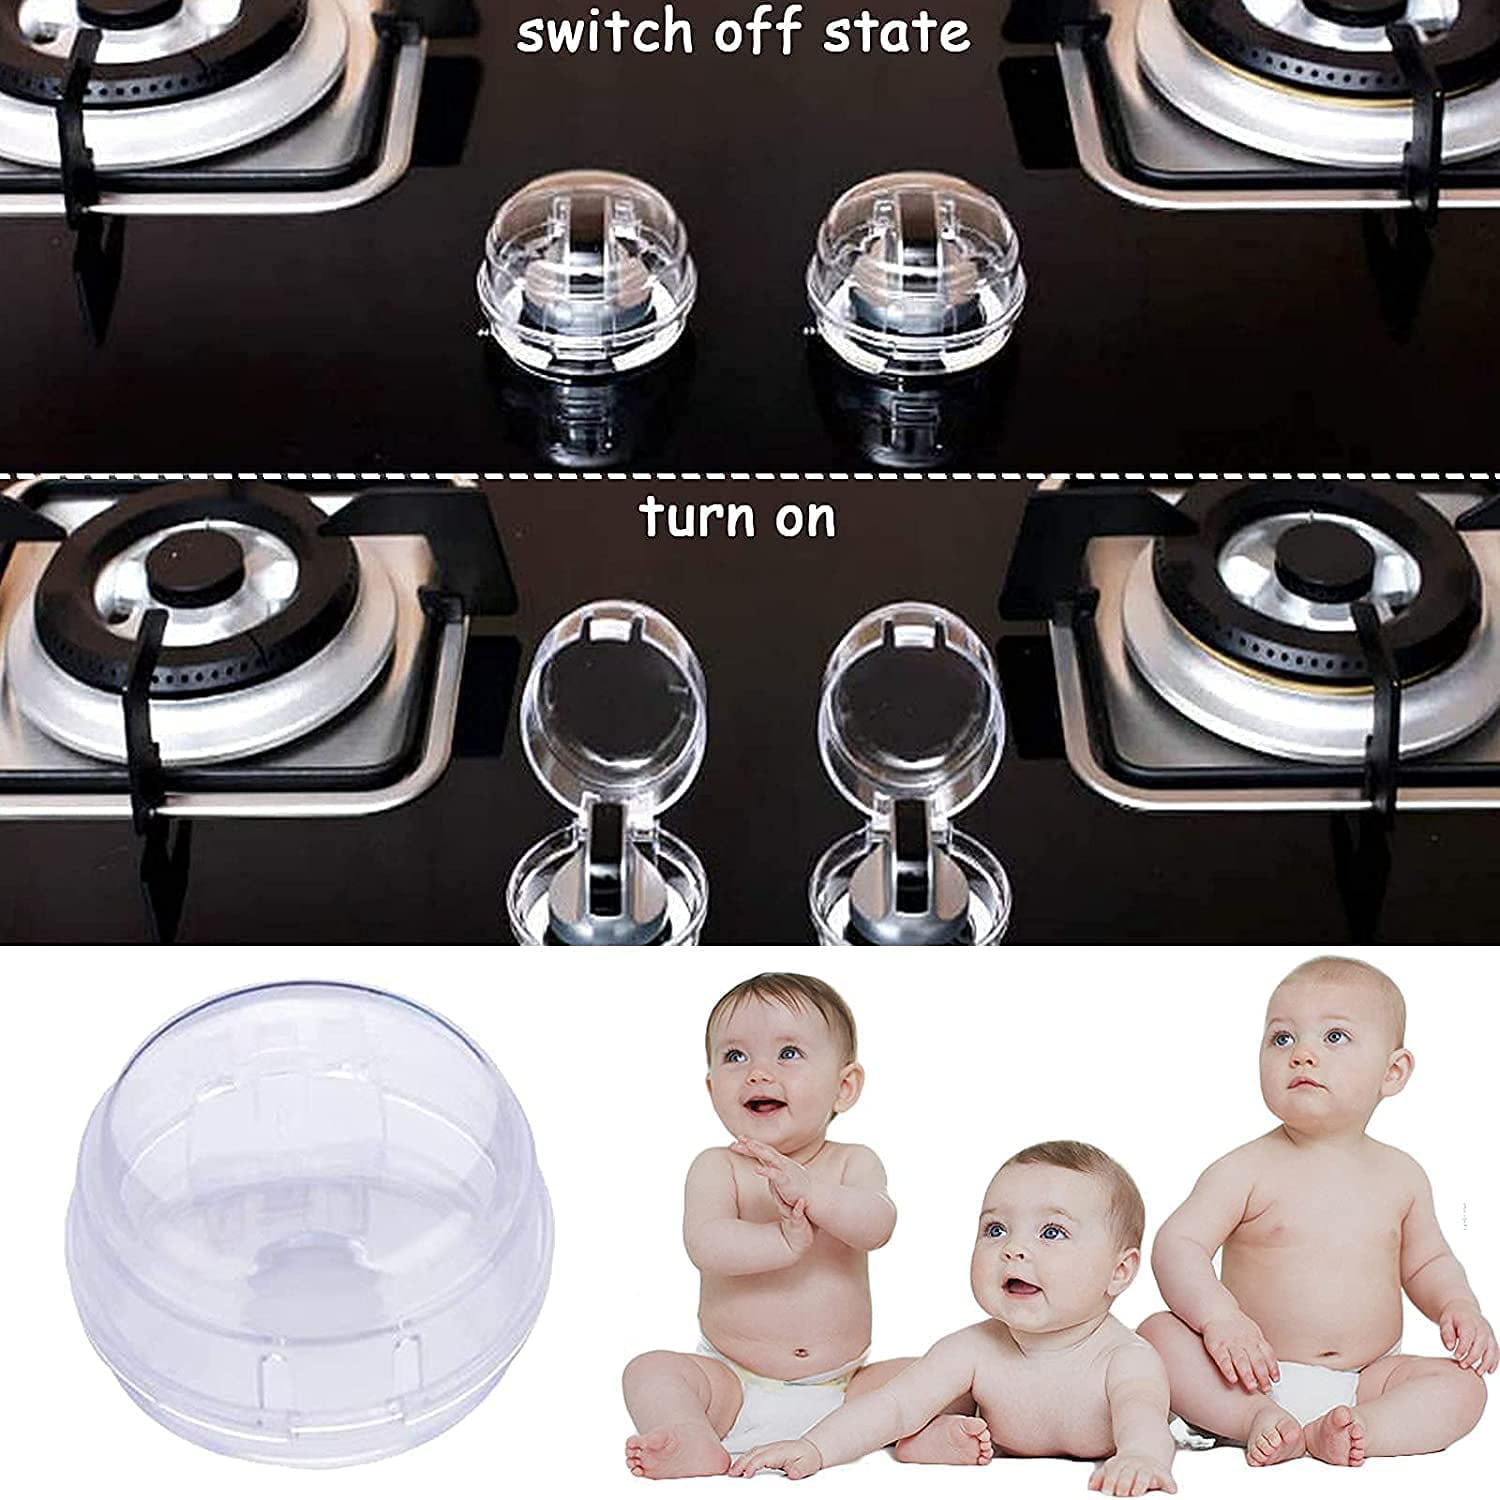 ibasenice 8 Pcs Cover Baby Food Pouch Toppers Clear Stove Knob Covers Stove  Knob Protector Oven Lock Child Safety Stove Protector for Kids Infant